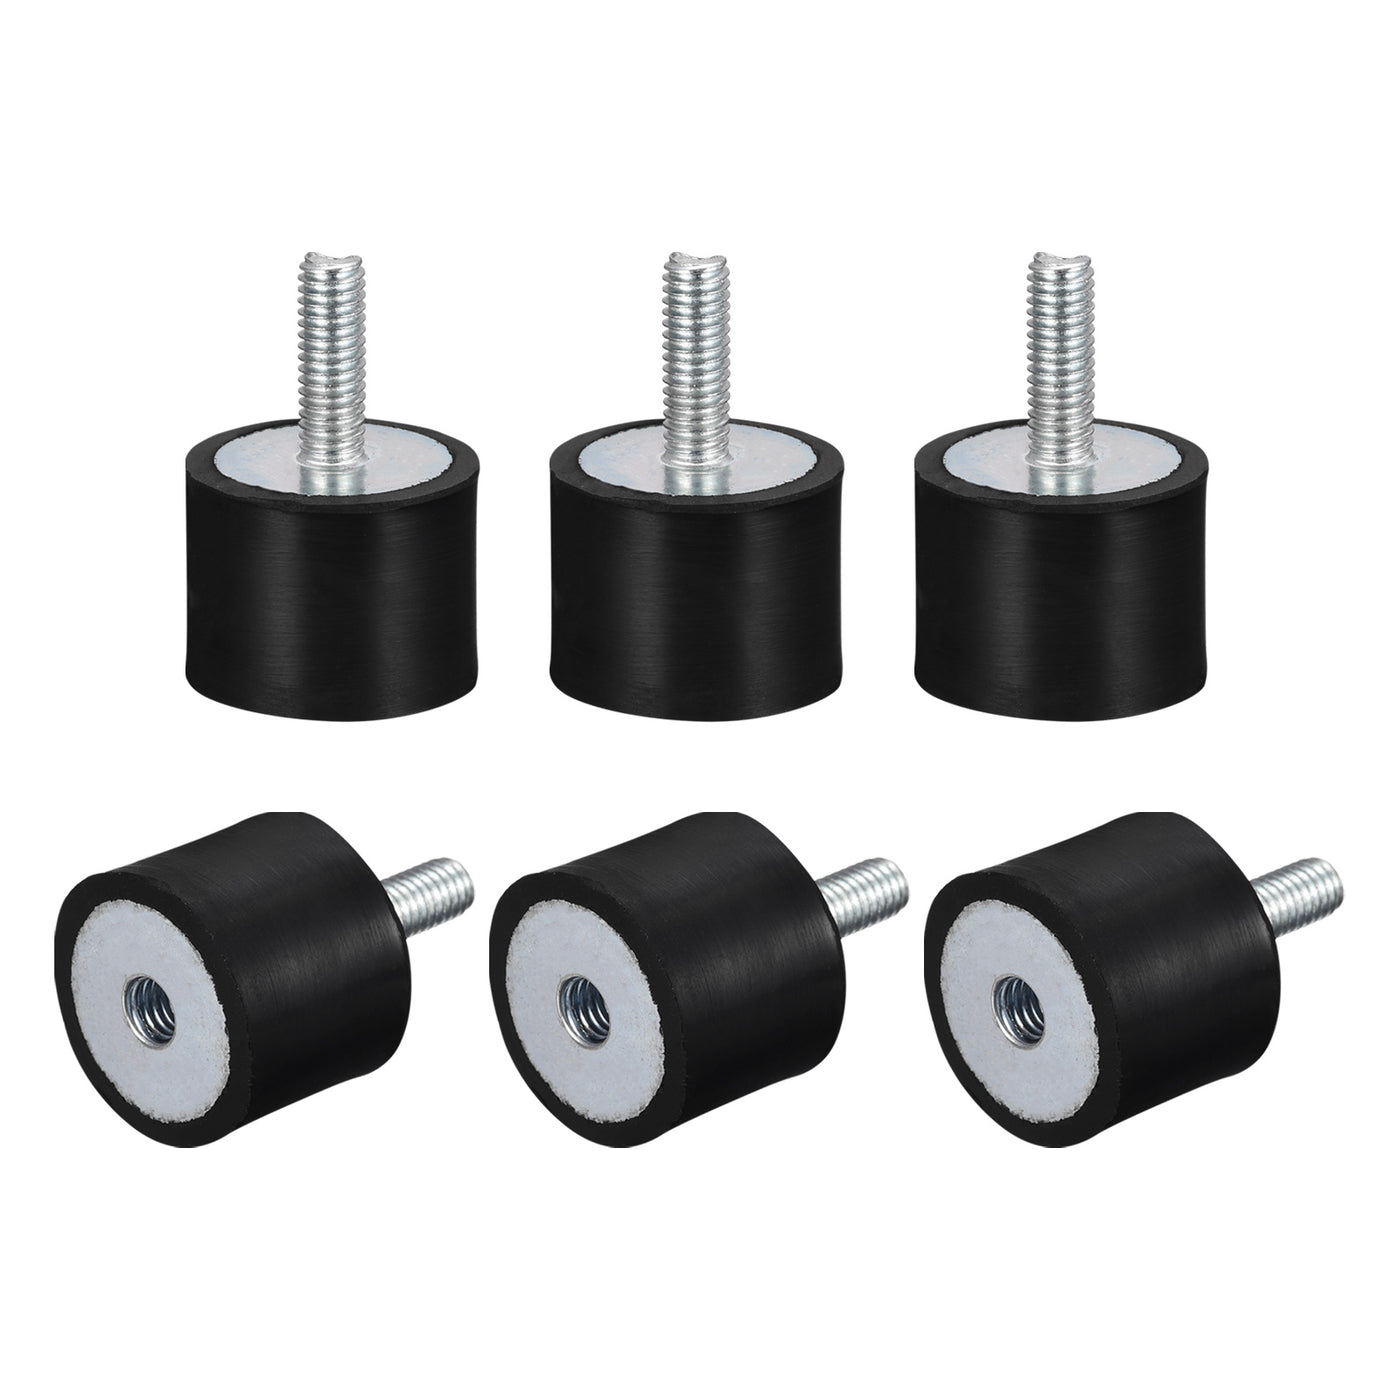 uxcell Uxcell Rubber Mount 6pcs M6 Male/Female Vibration Isolator Shock Absorber, D25mmxH20mm